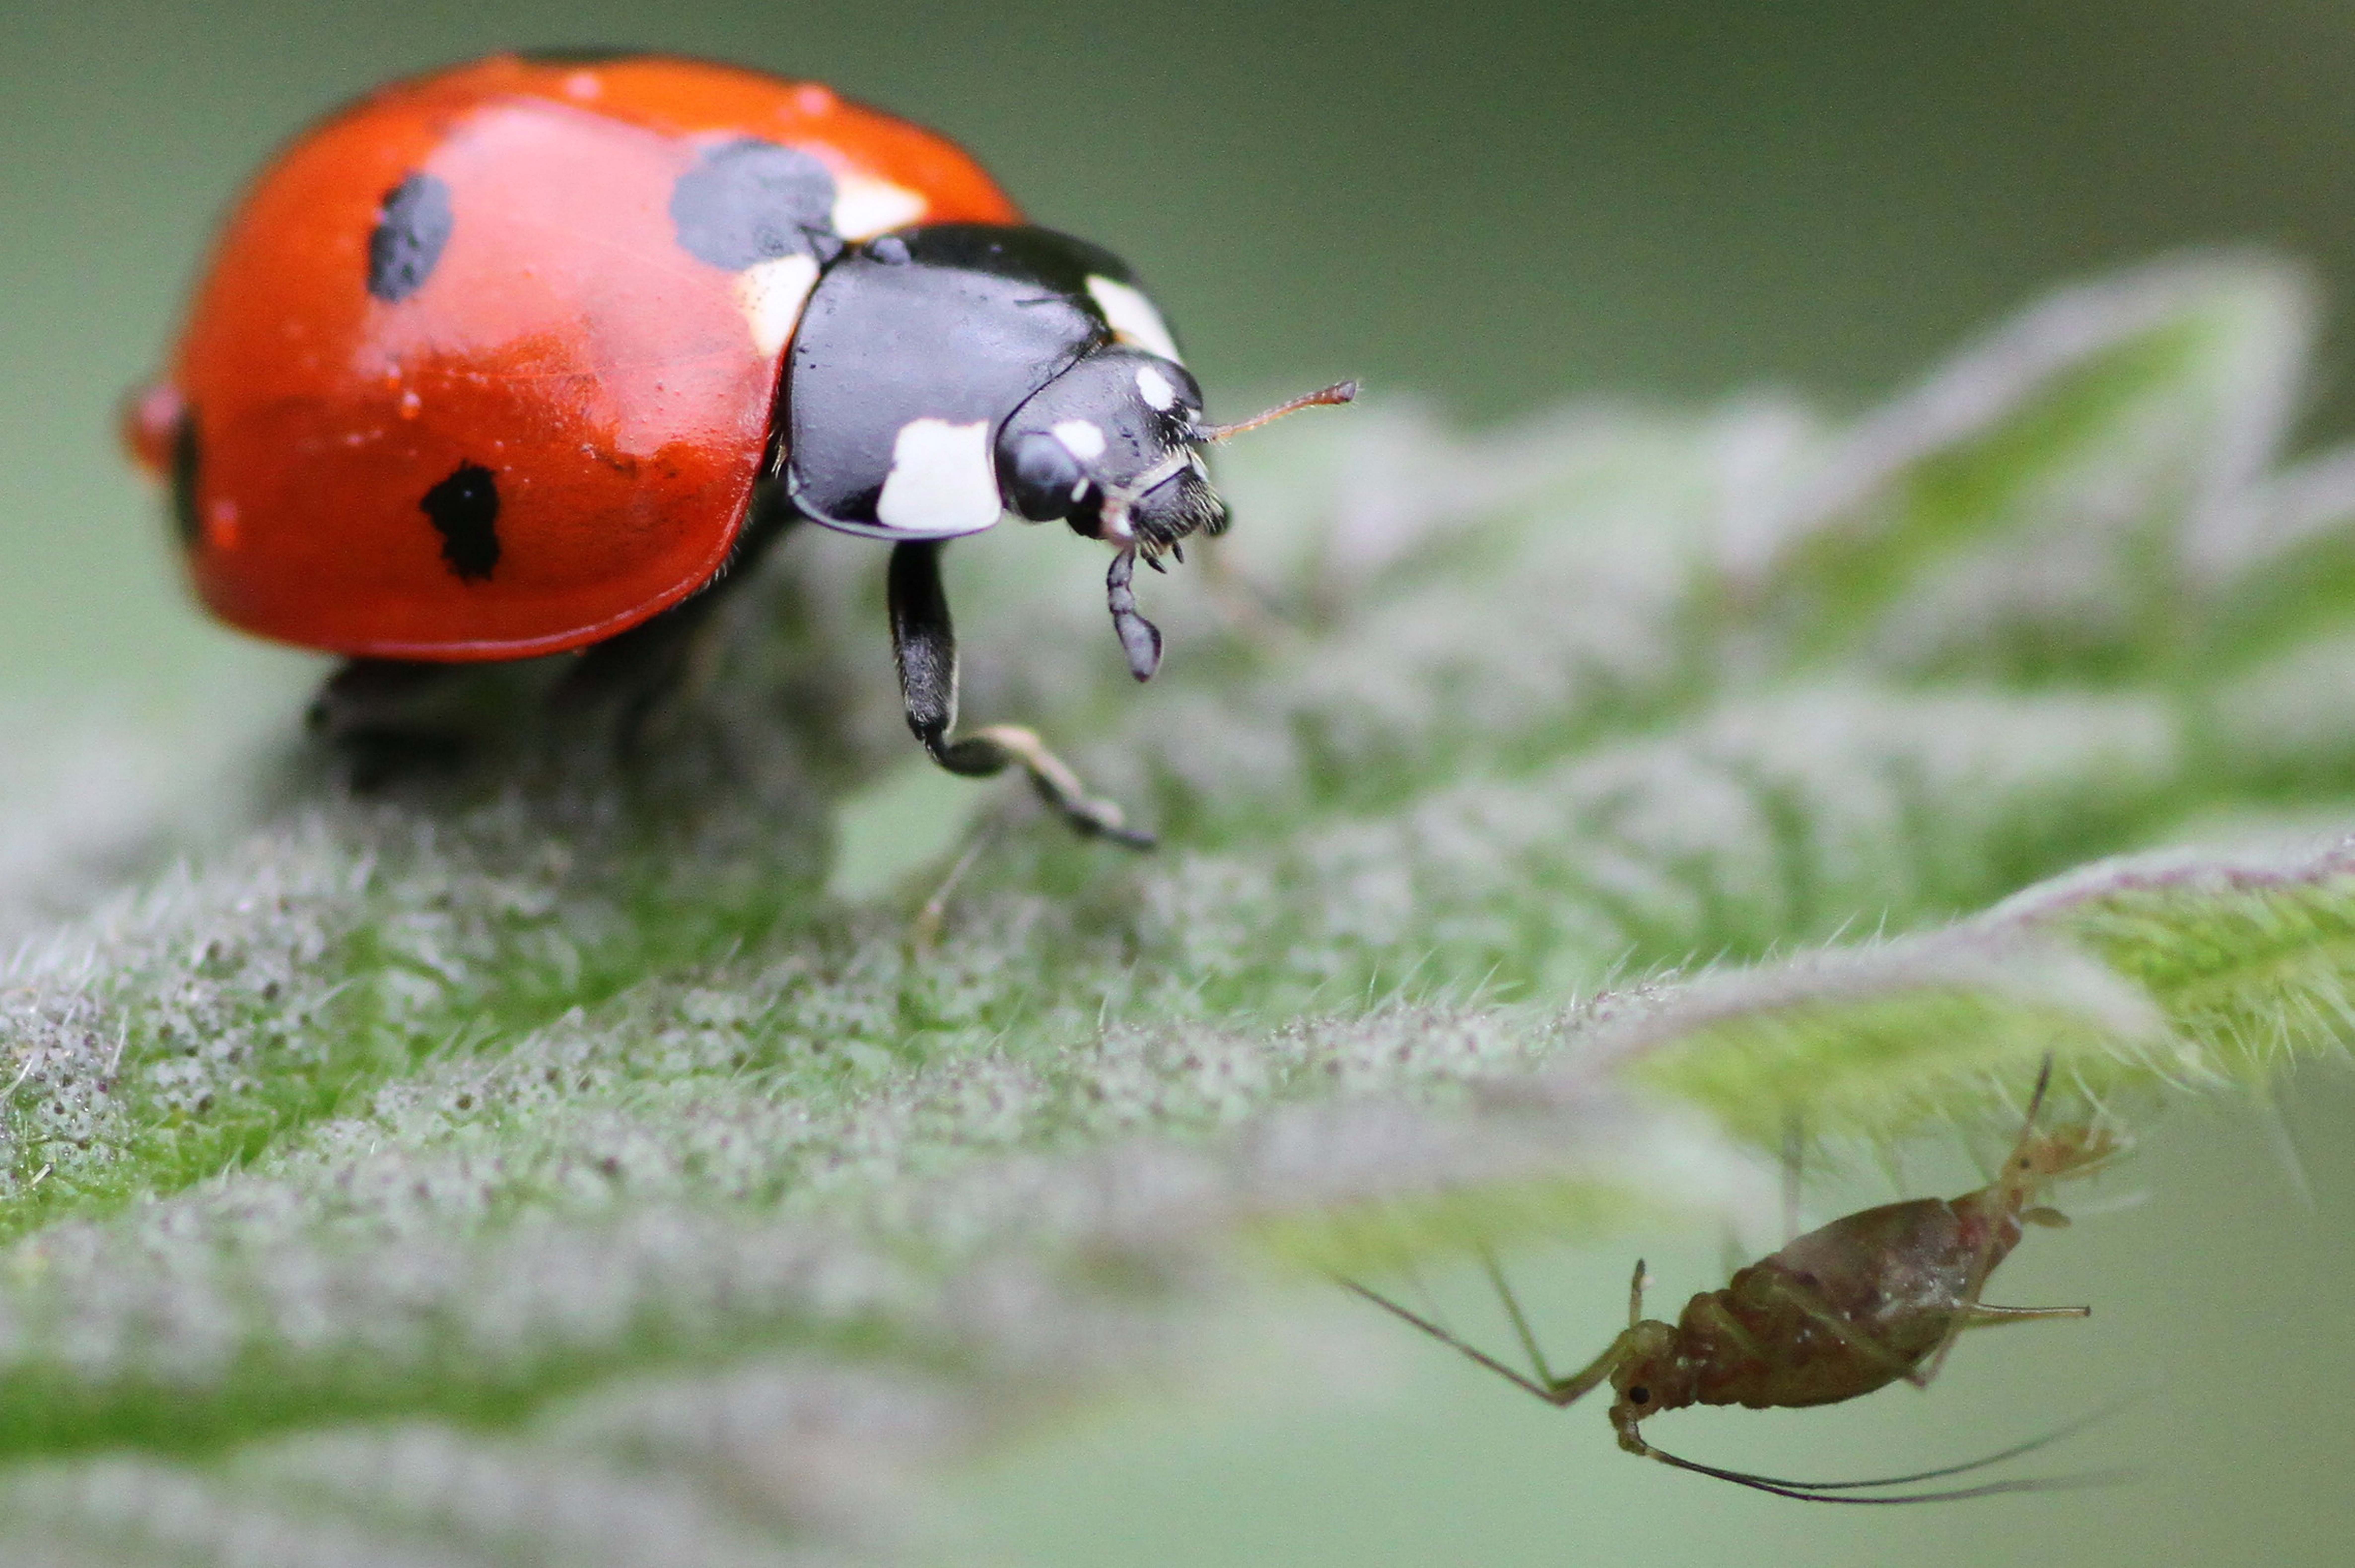 Seven spot ladybird, Coccinella septempuctata, and aphid on a leaf